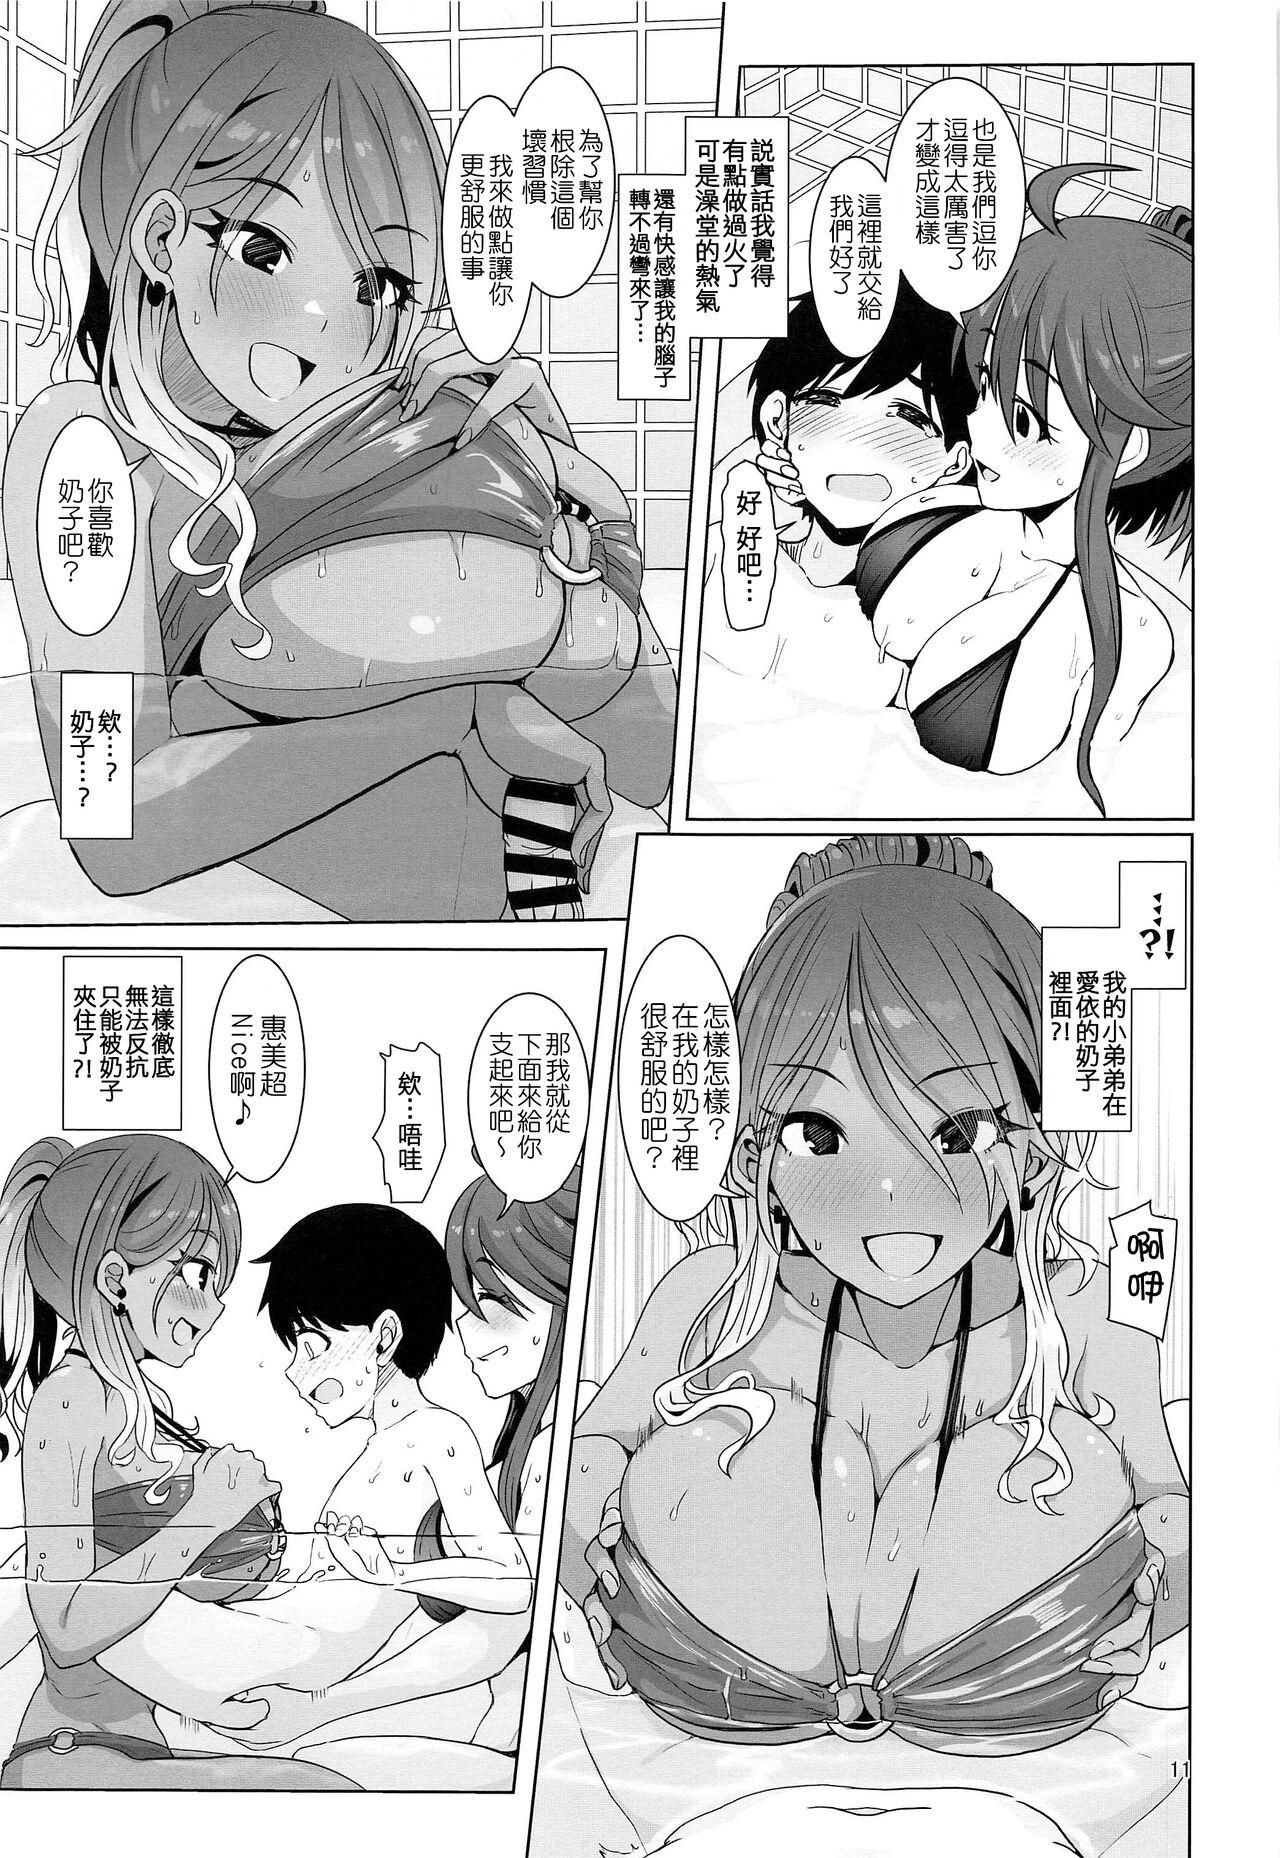 Deep Throat May You Make Me Happy? - The idolmaster Furry - Page 13